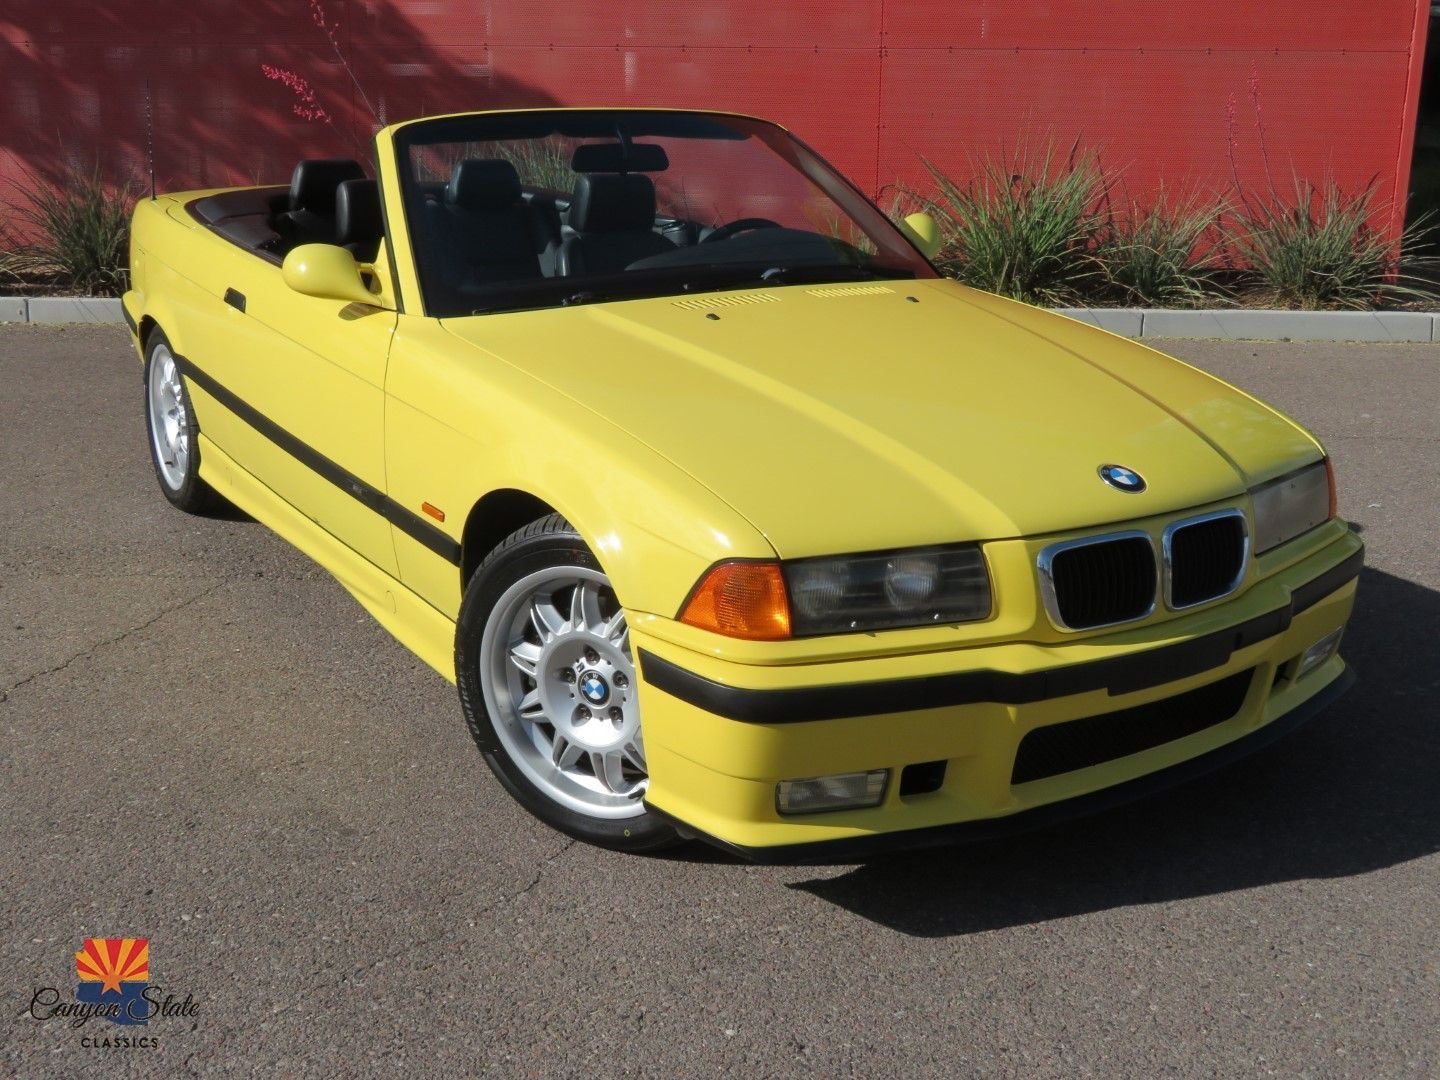 1998 BMW 3 Series | Canyon State Classics